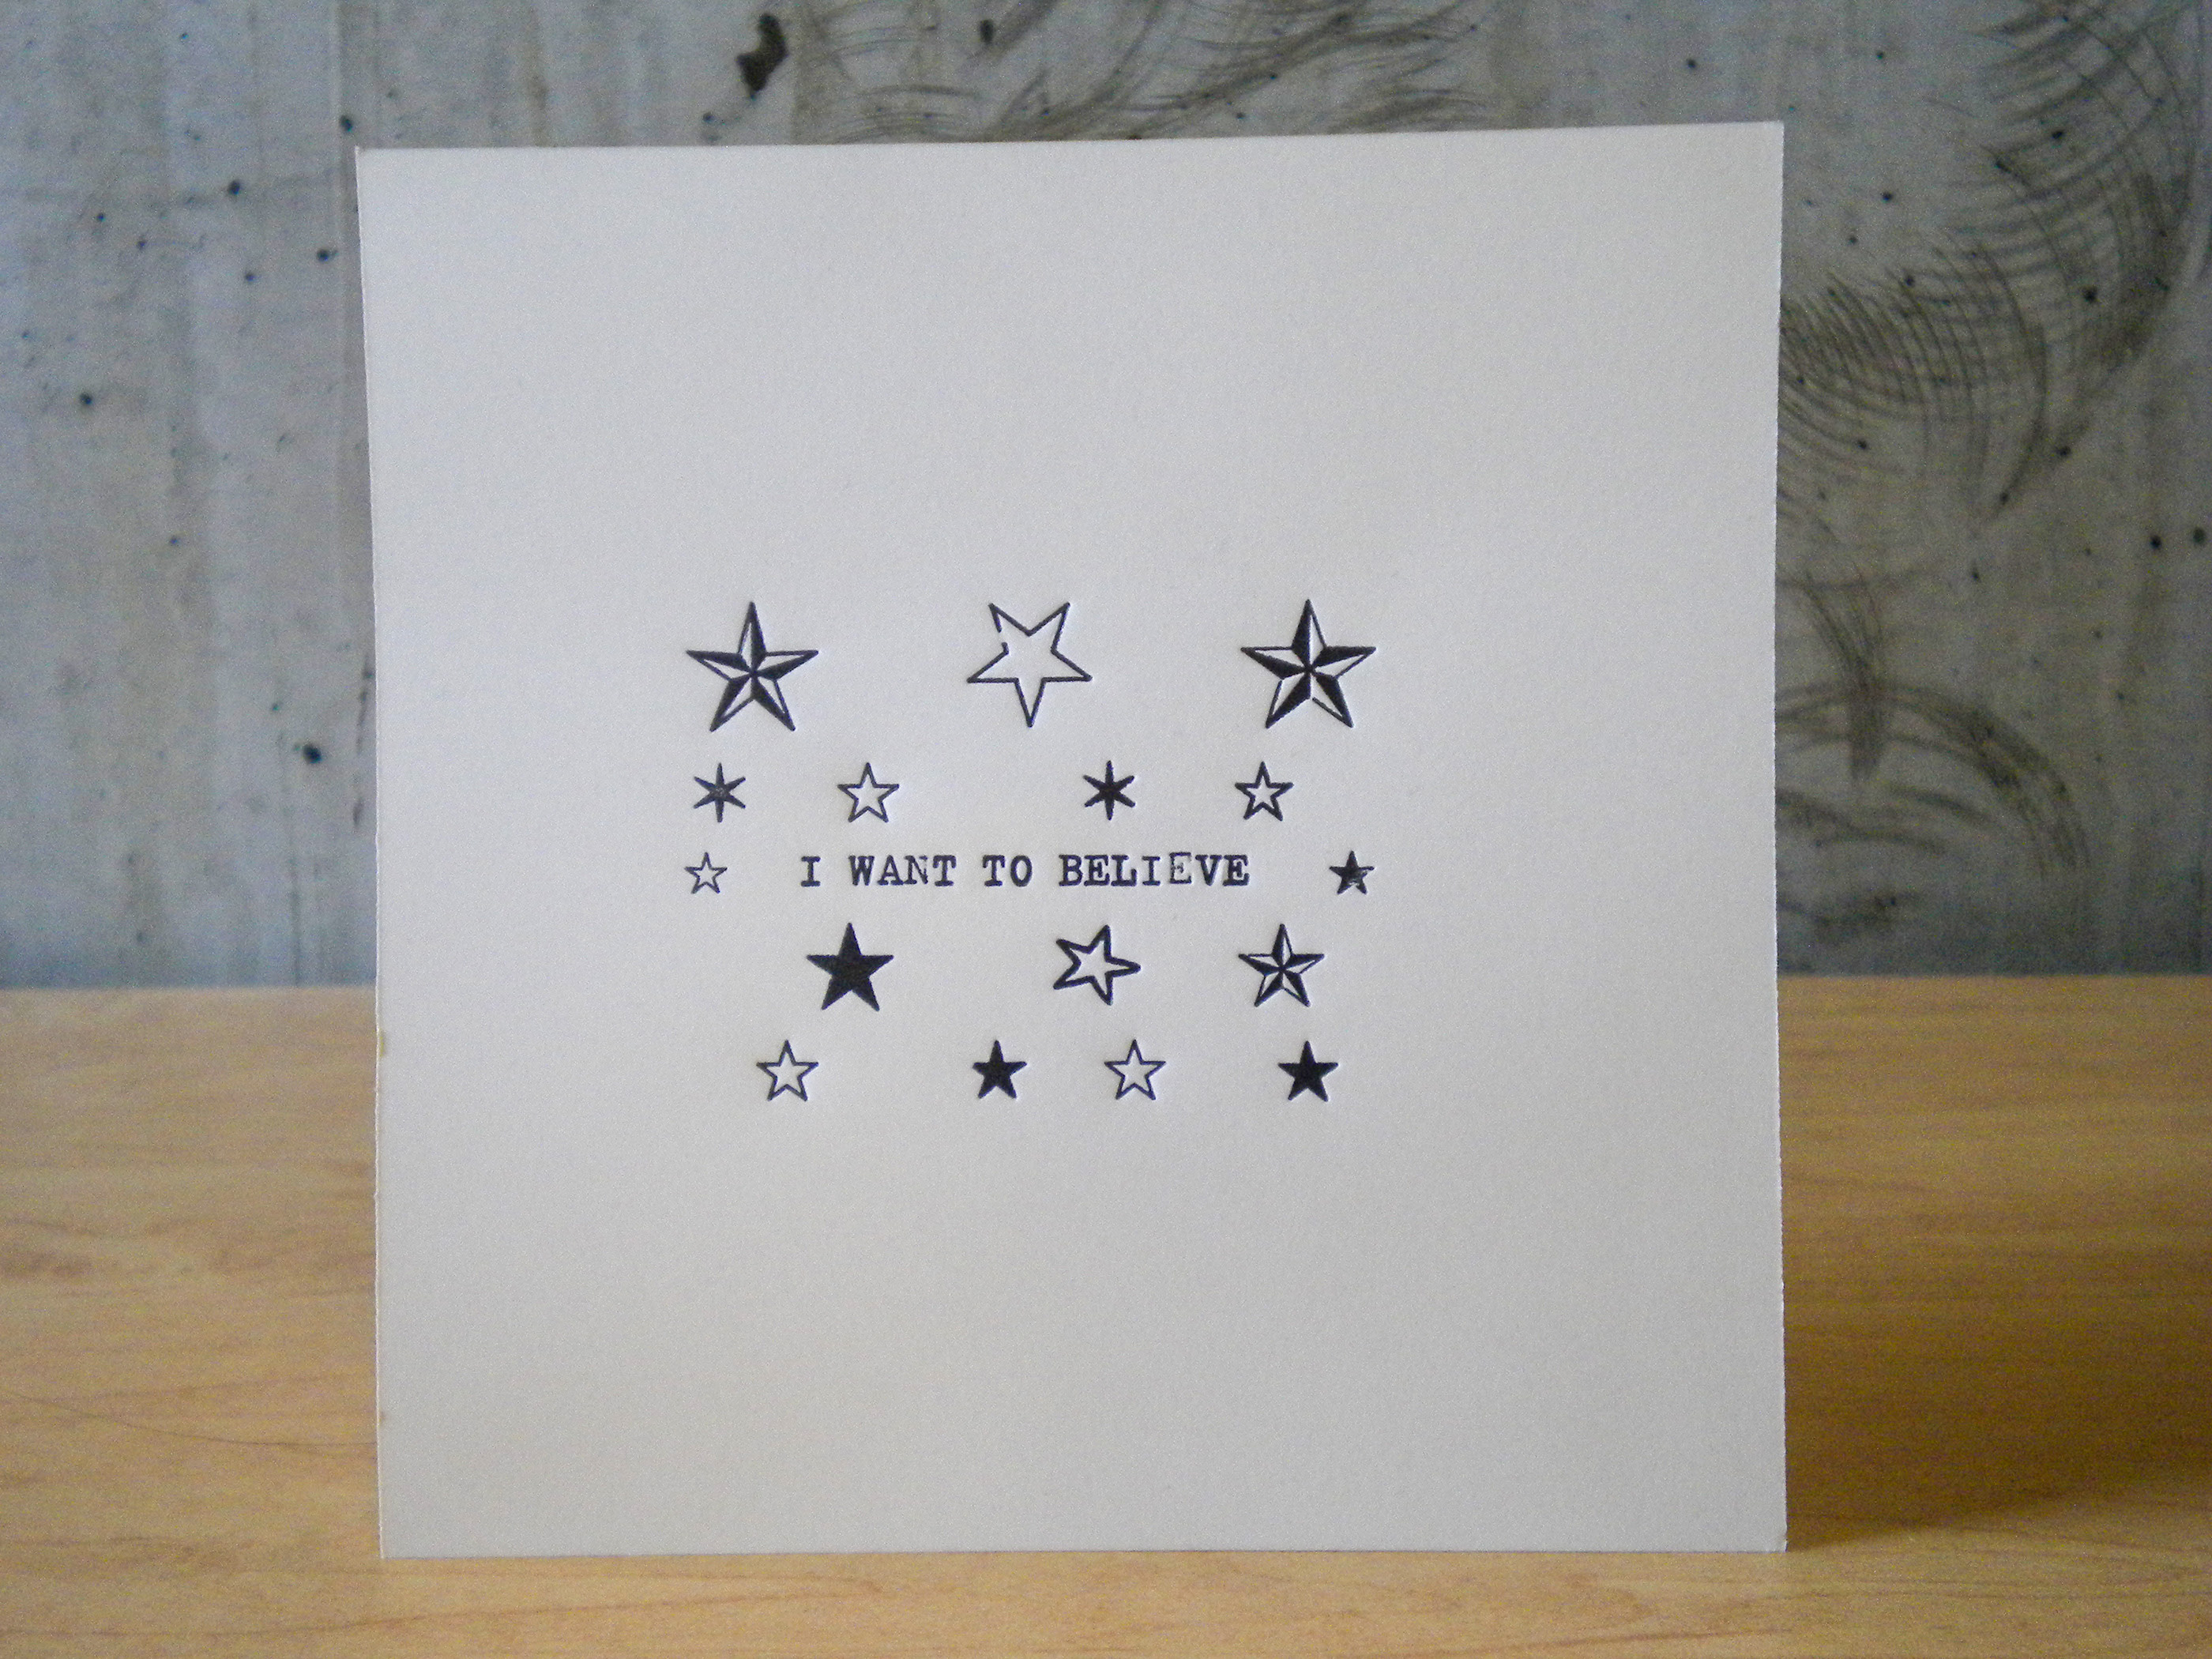 Letterpress printed phrase I want to believe surrounded by star ornaments